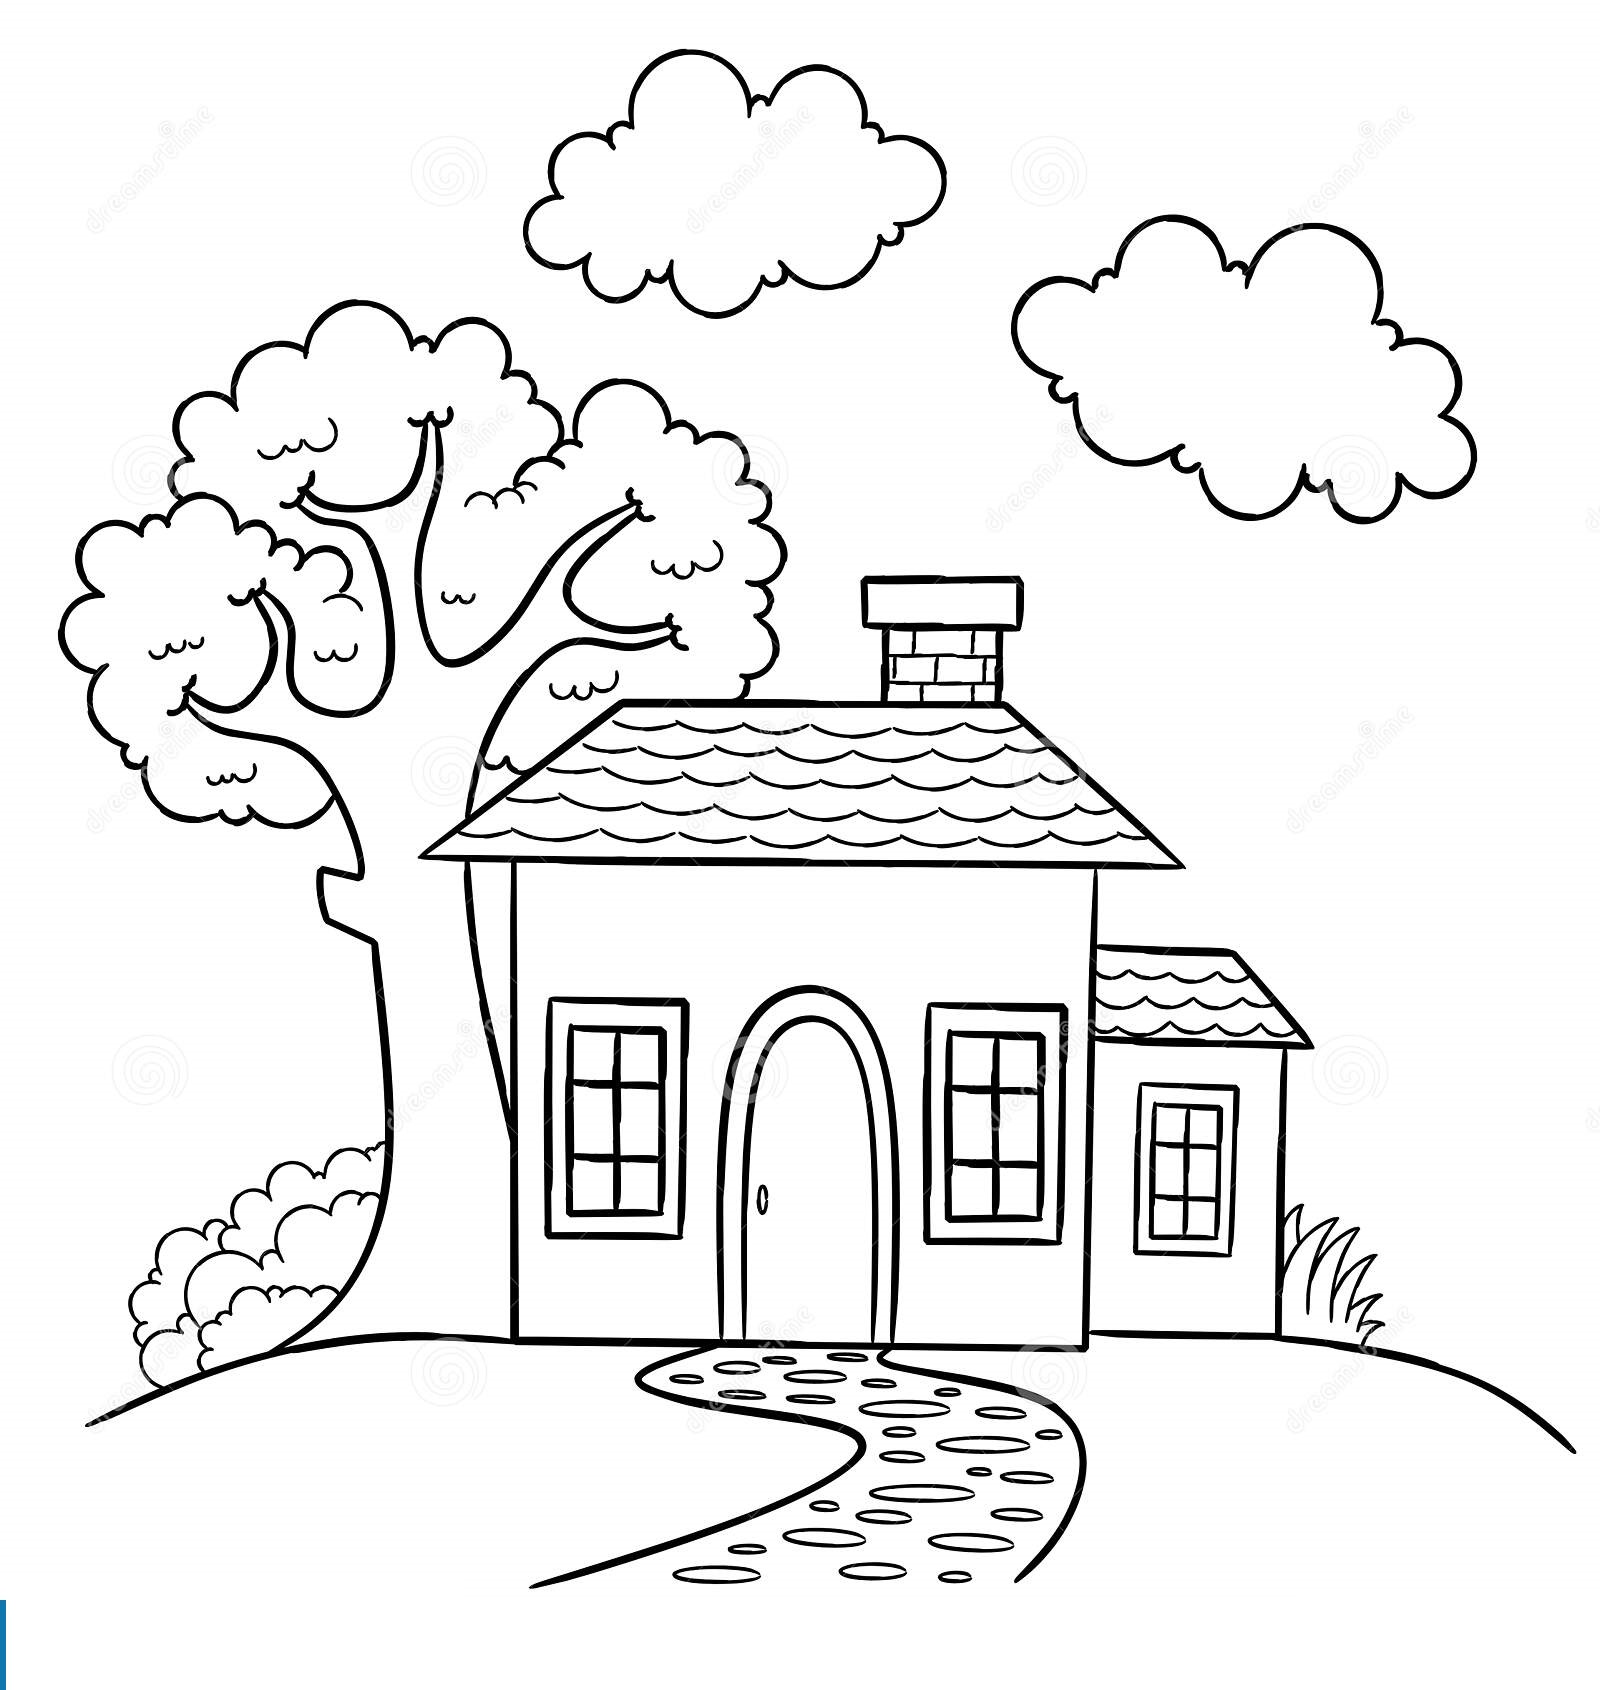 house coloring page